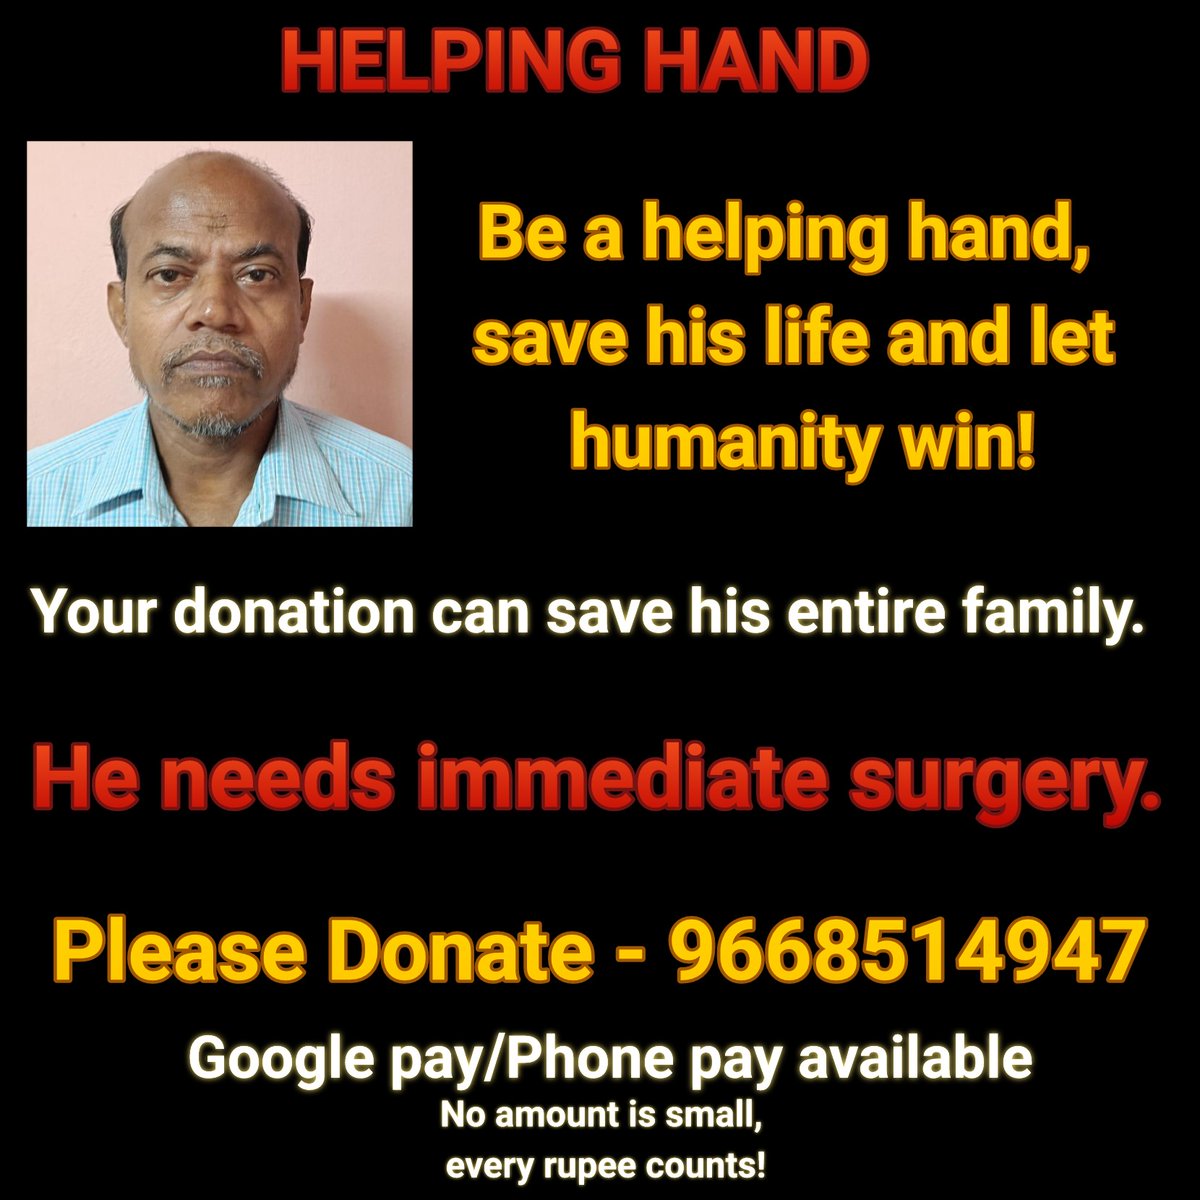 No amount is big or small. Please donate so he can have a second chance in life. Donate now
Gpay/phonepay- 9668514947

SAVE AMAR LIFE